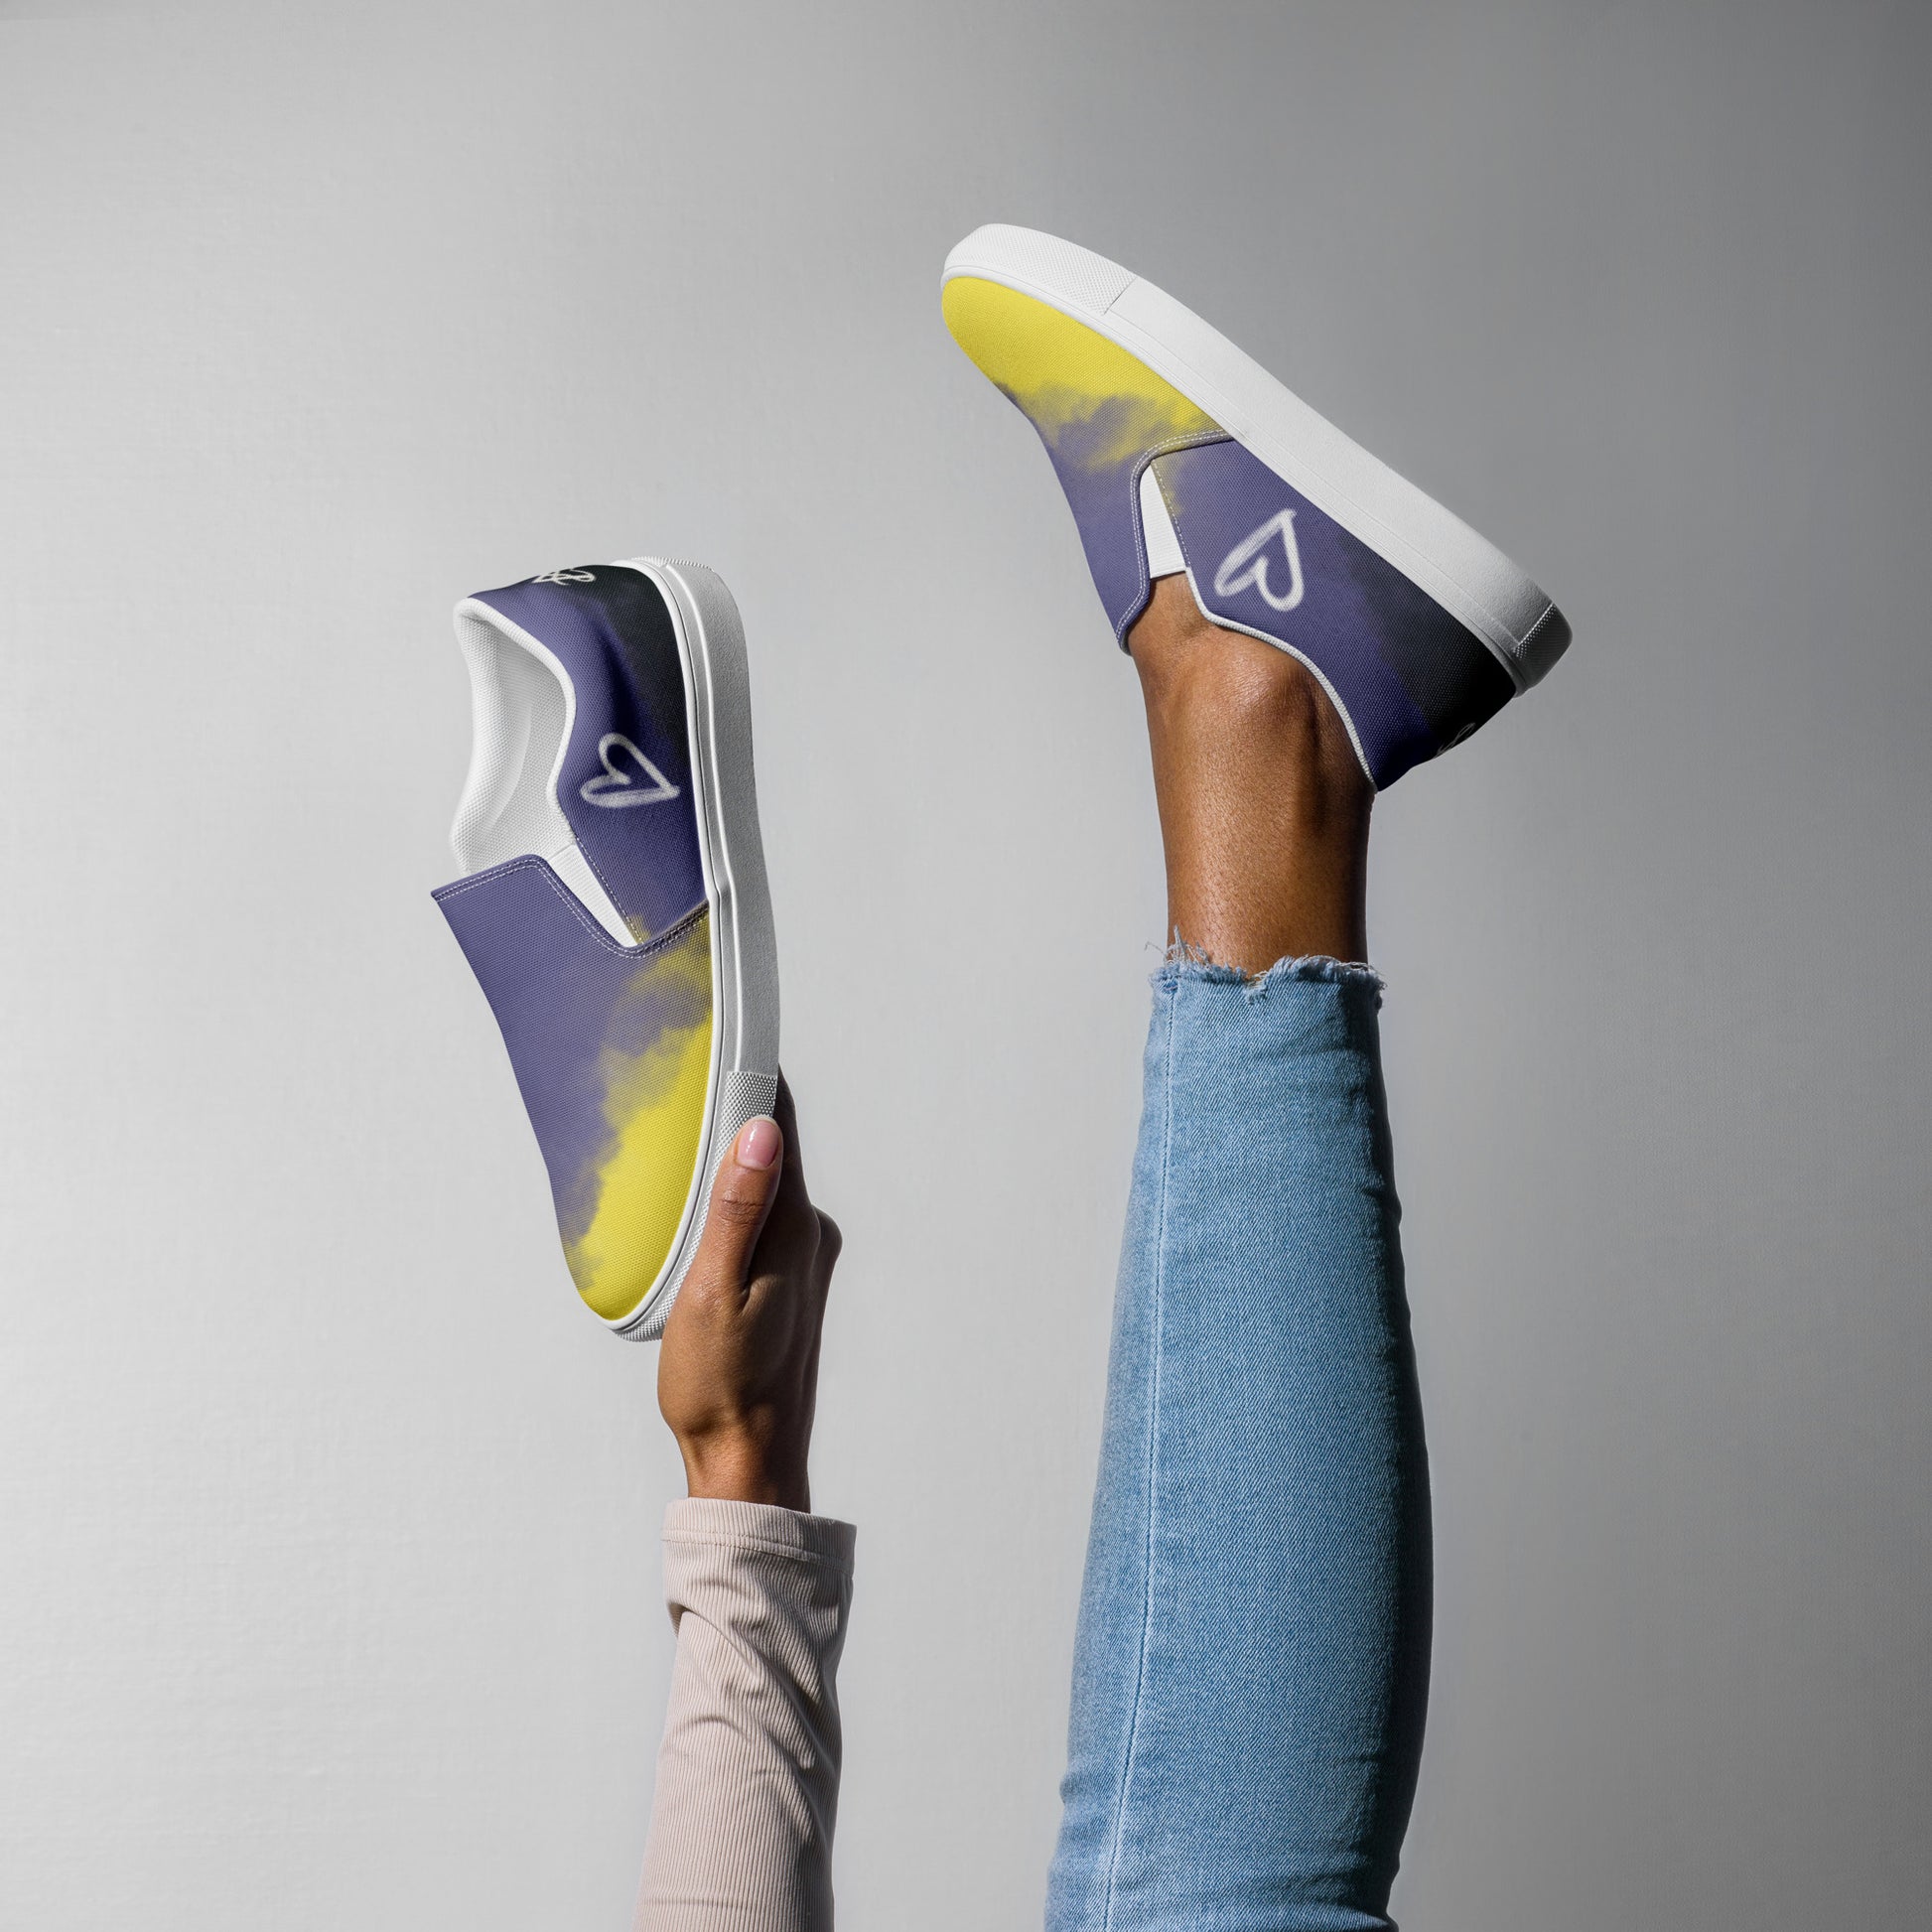 A model wears one and holds up a second slip-on shoe with the non-binary colors in wisps of clouds with a white hand drawn heart on the outside under the ankle and the Aras Sivad Studio logo in white on the back.